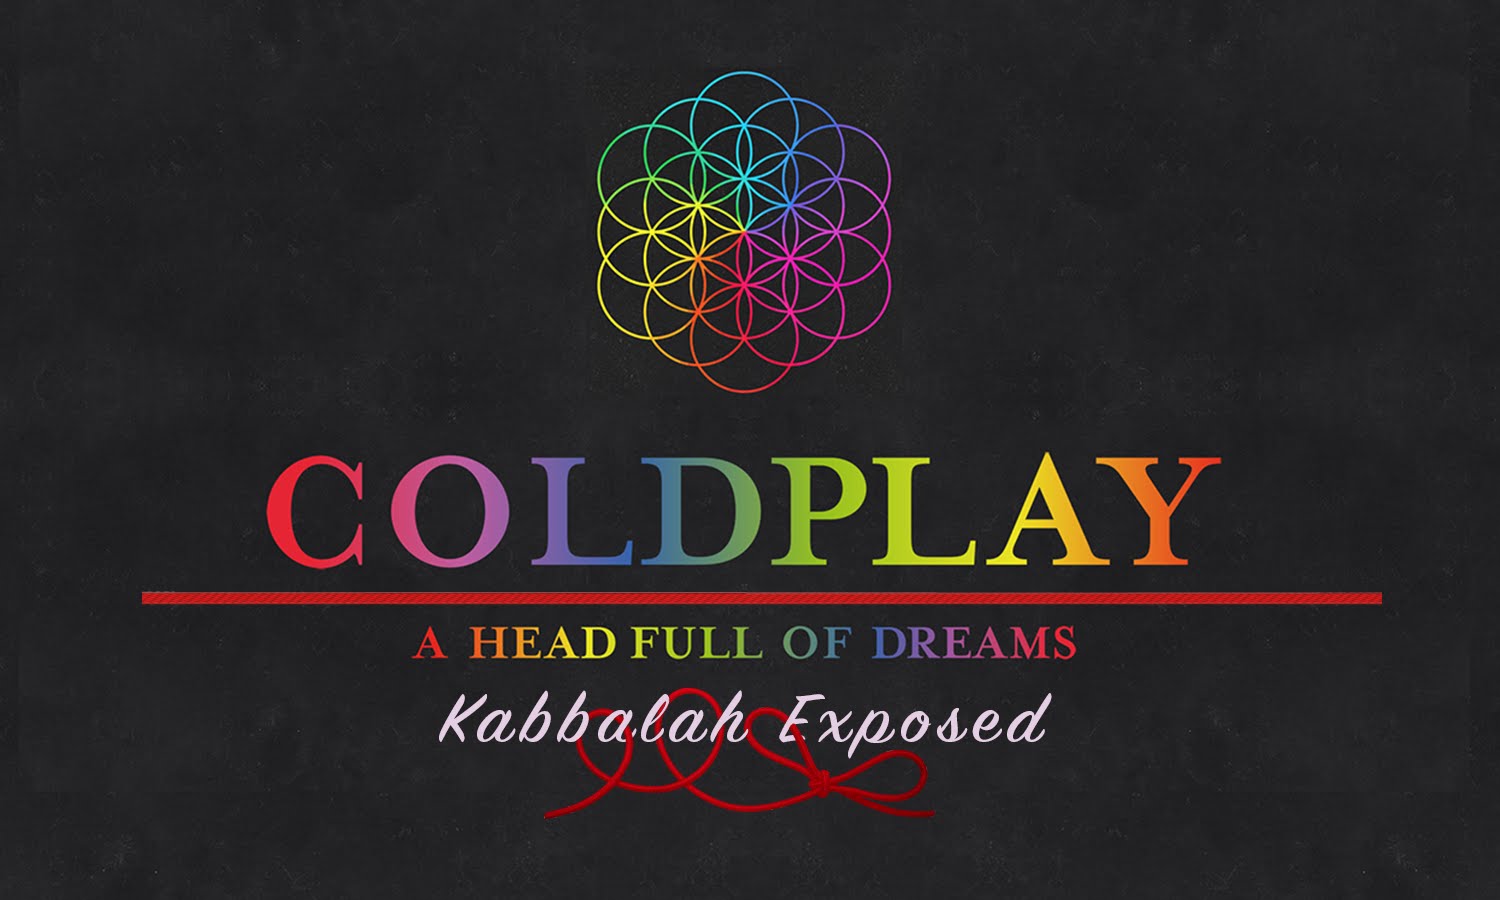 Coldplay : A Head Full Of Dreams – SUPER BOWL EXPOSED!